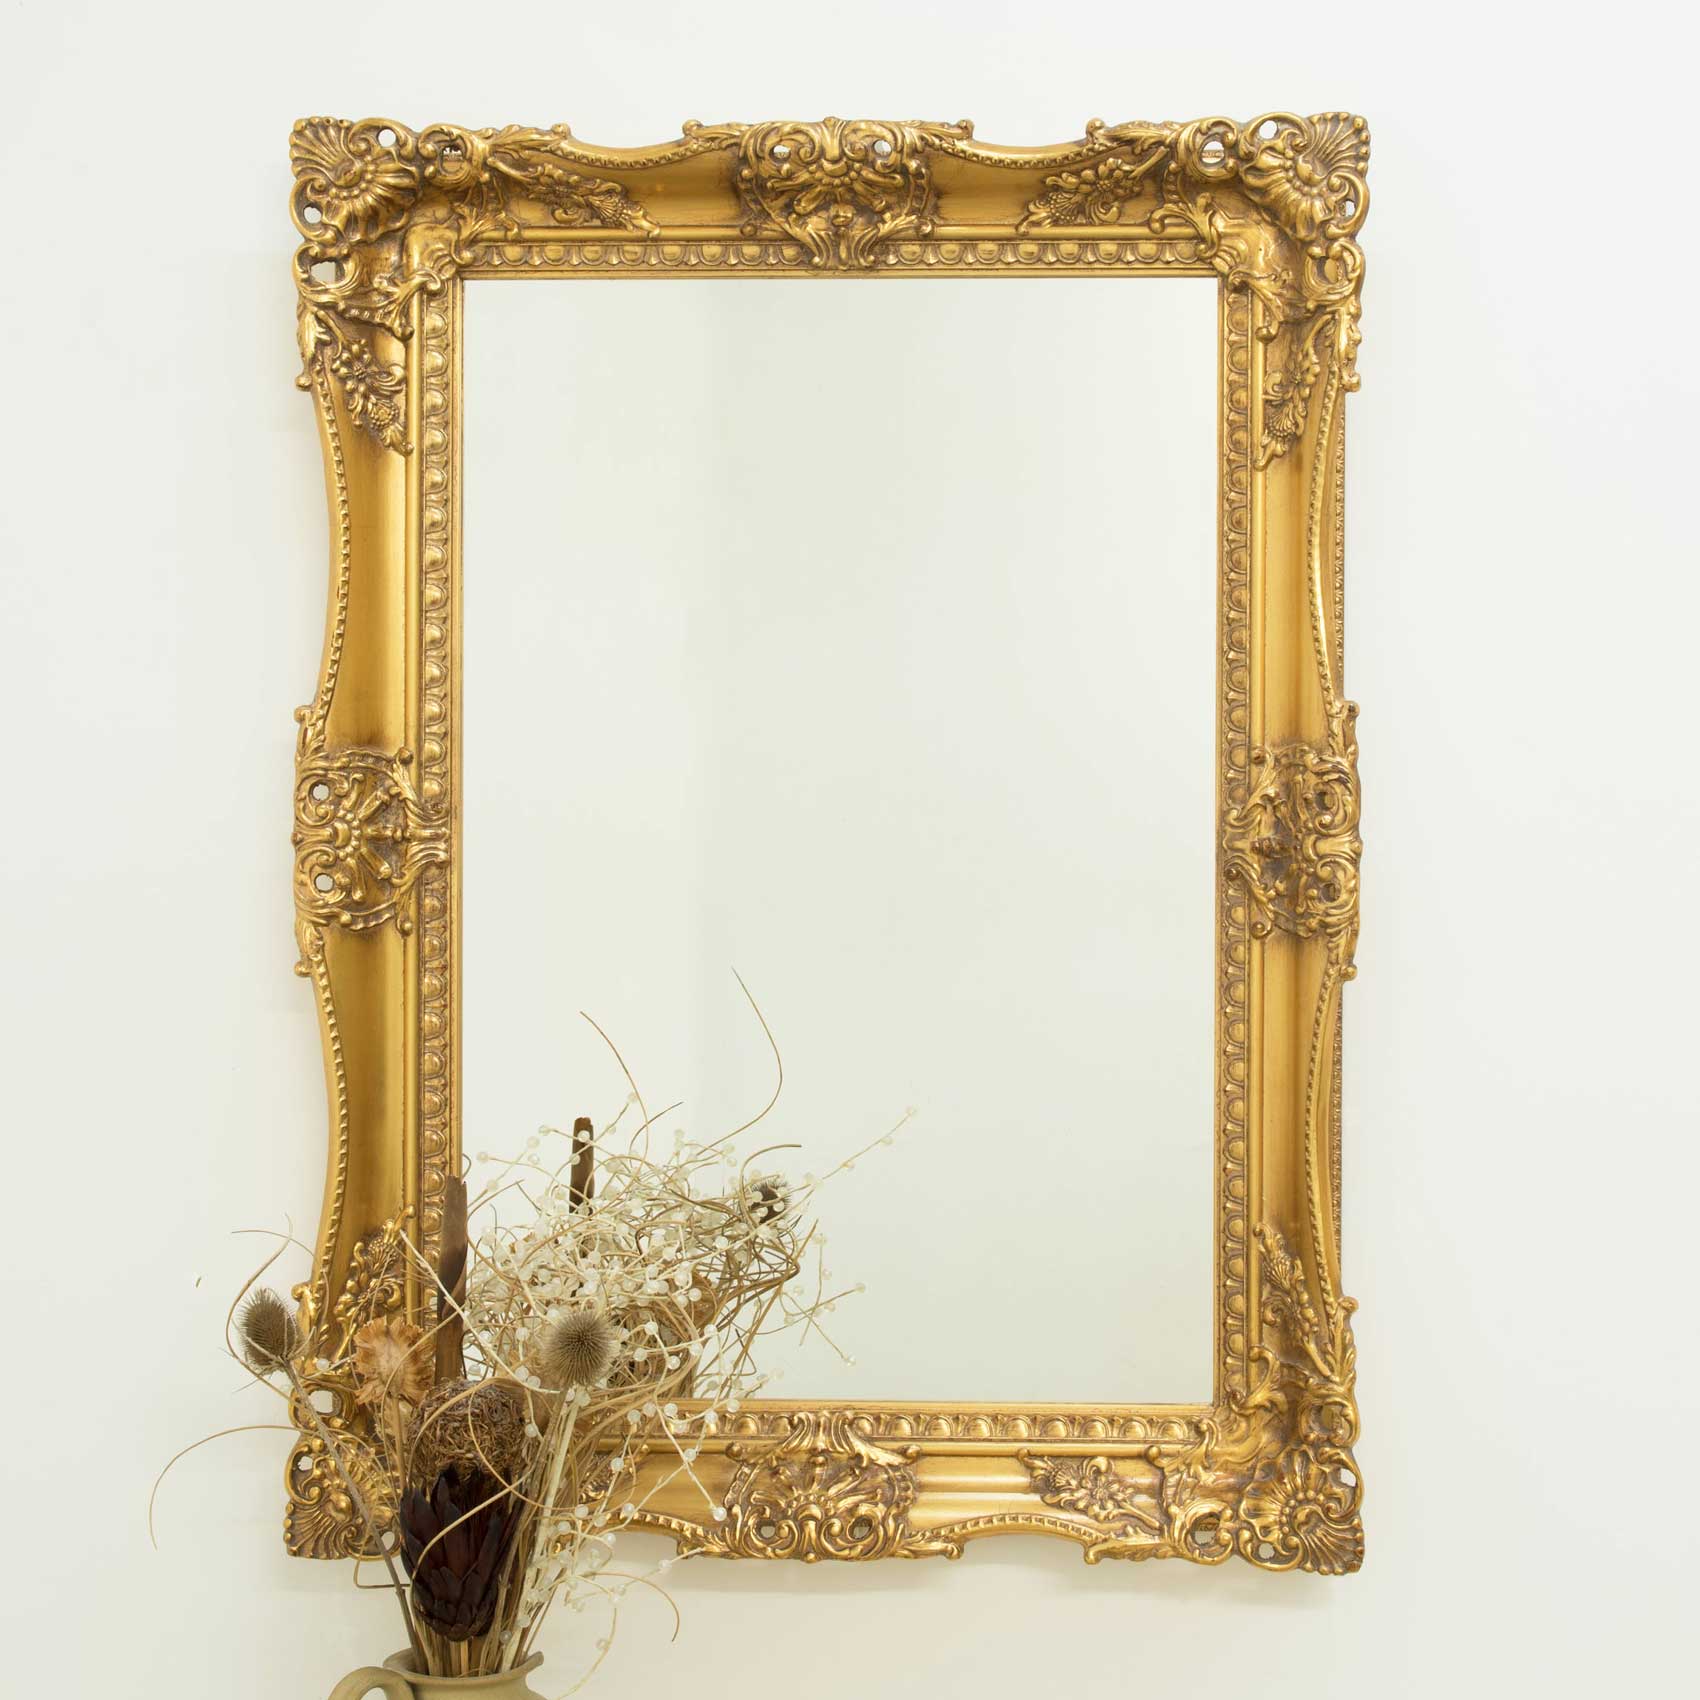 Extra Large Gold Ornate Vintage Wall Mirror 3ft1 X 2ft3 94cm X 68cm Wood Ebay 